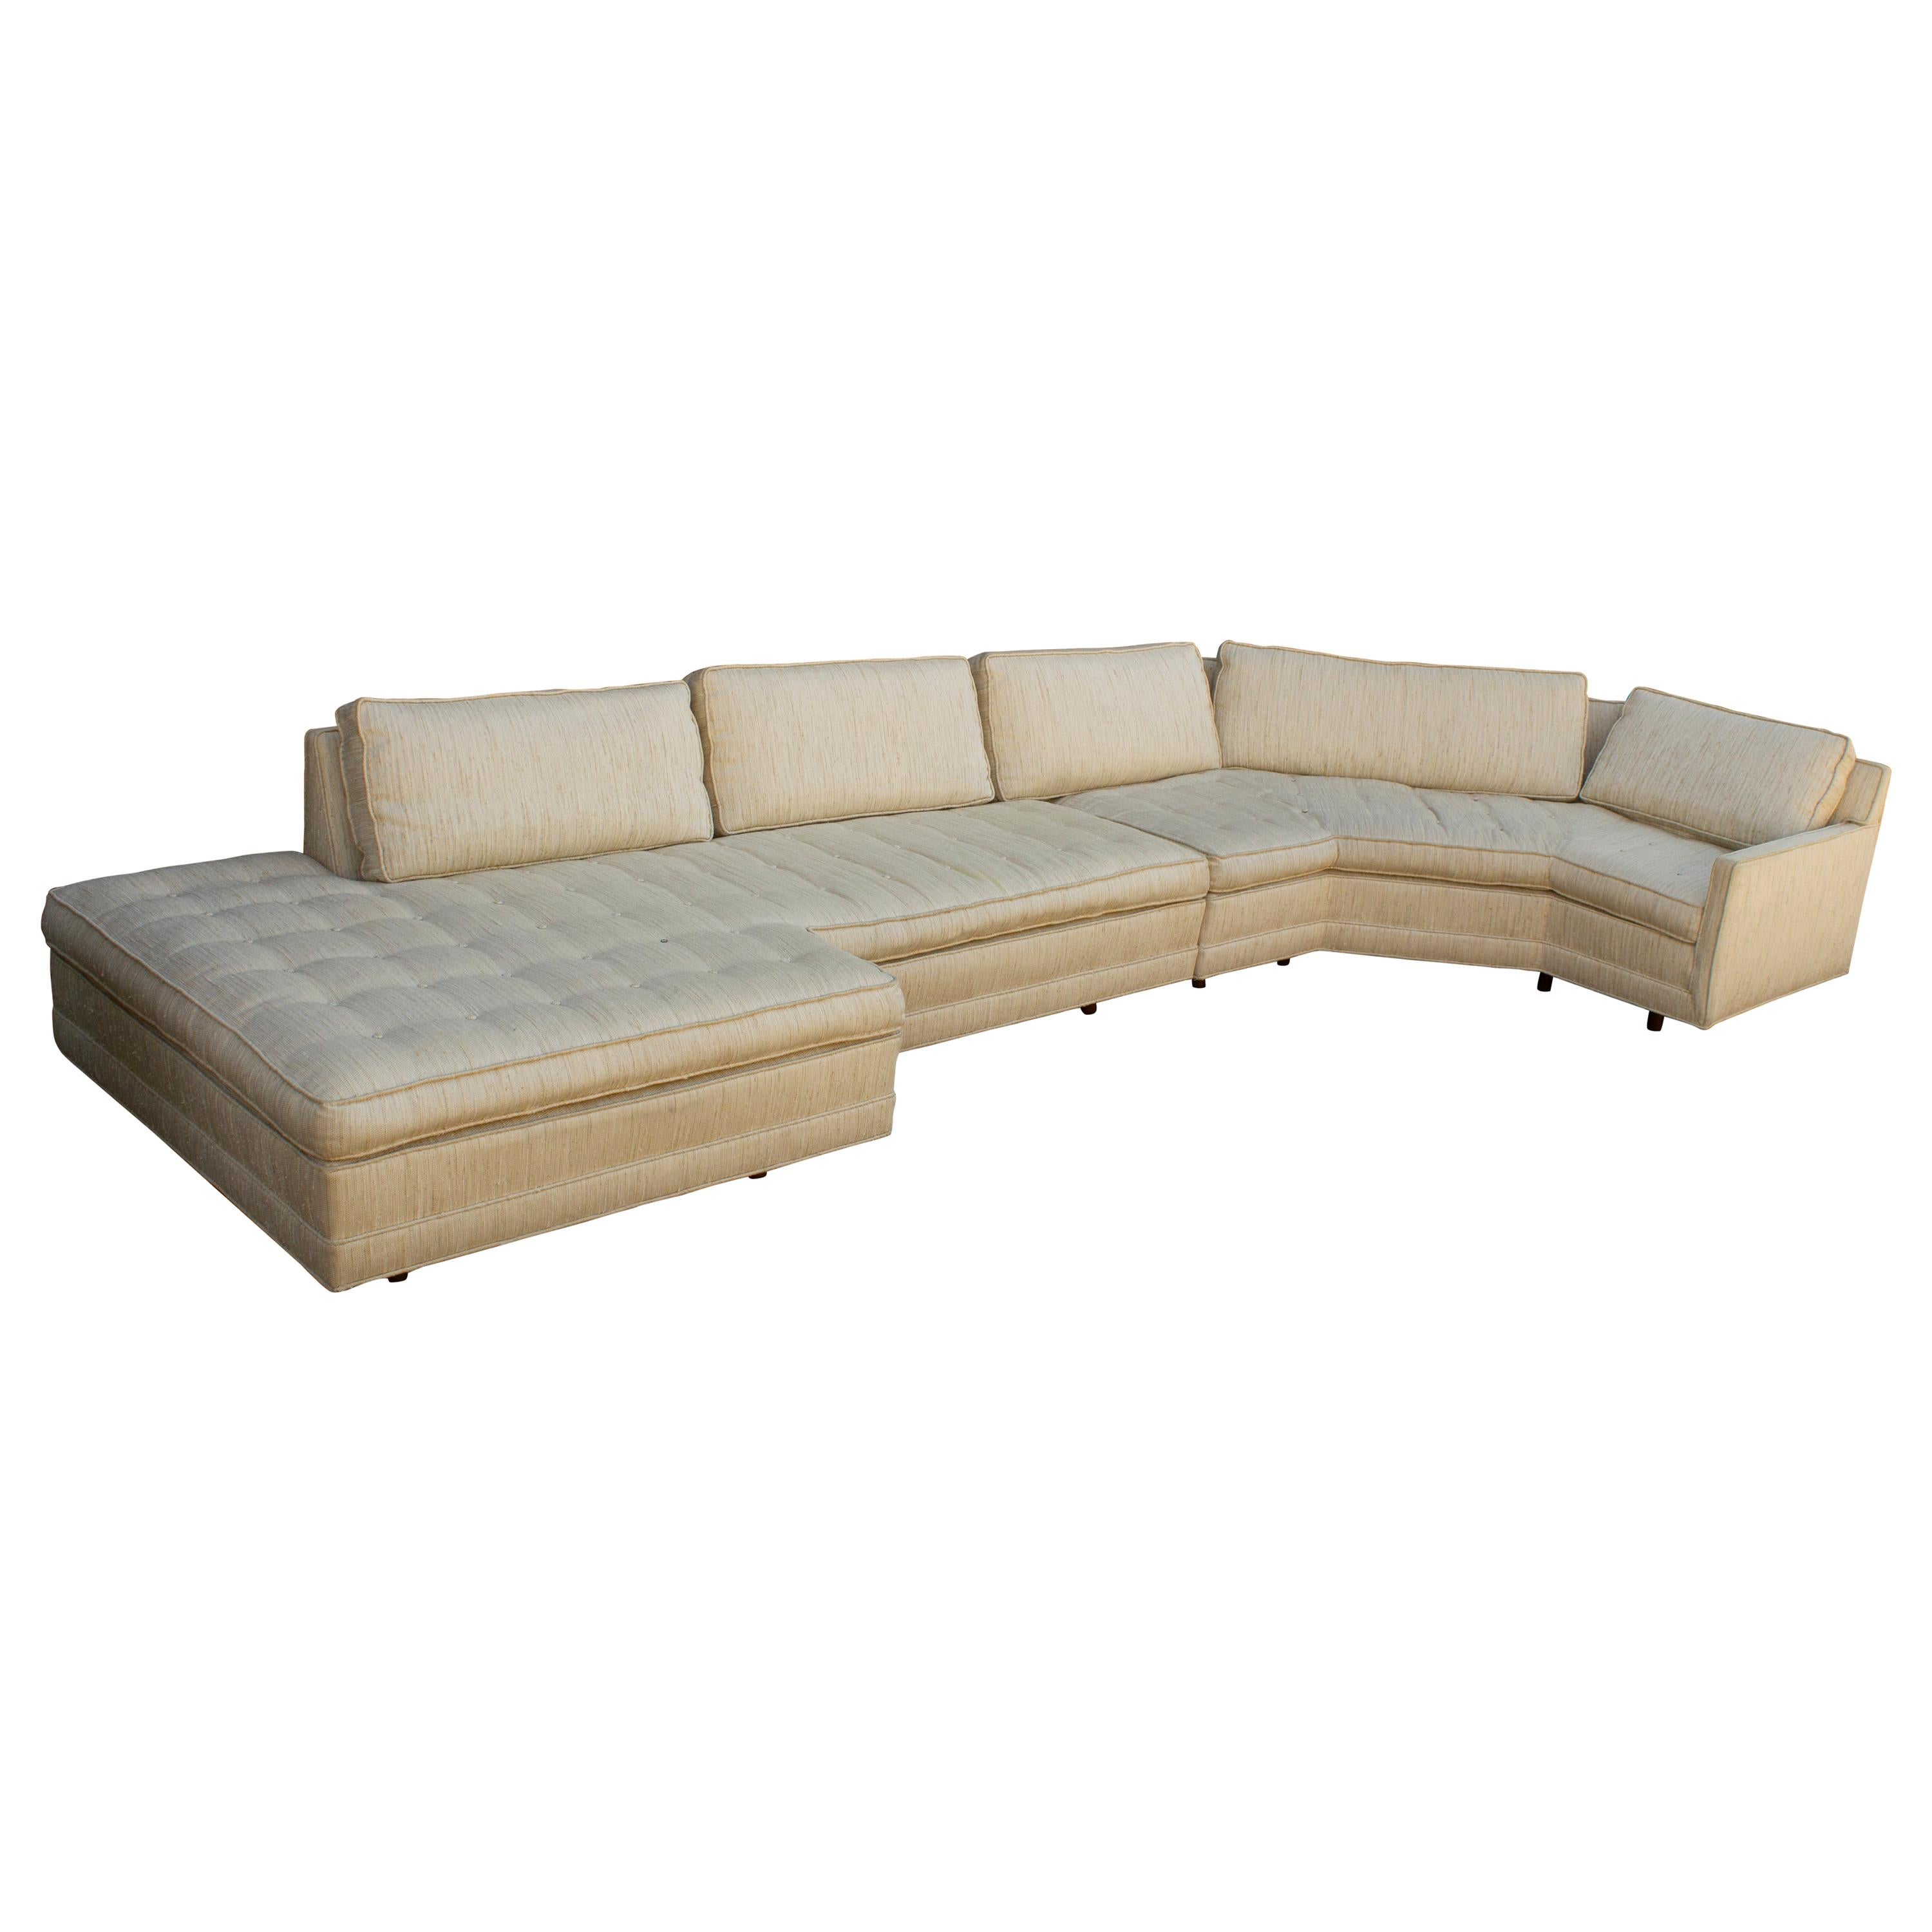 Two-Piece Sectional Sofa Designed by Harvey Probber